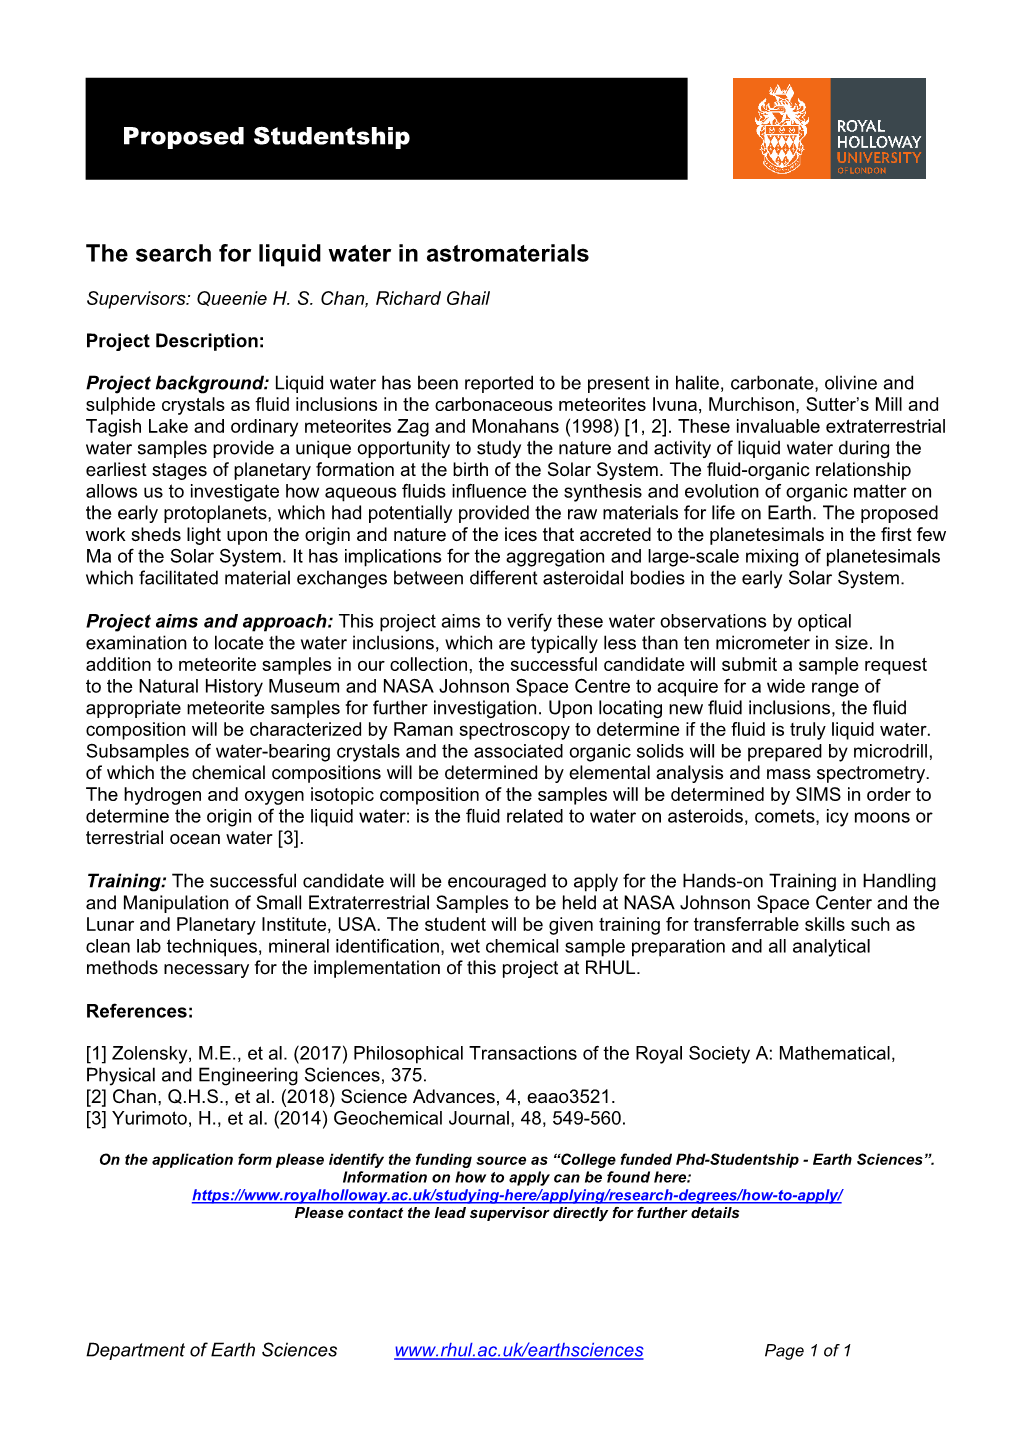 The Search for Liquid Water in Astromaterials Proposed Studentship